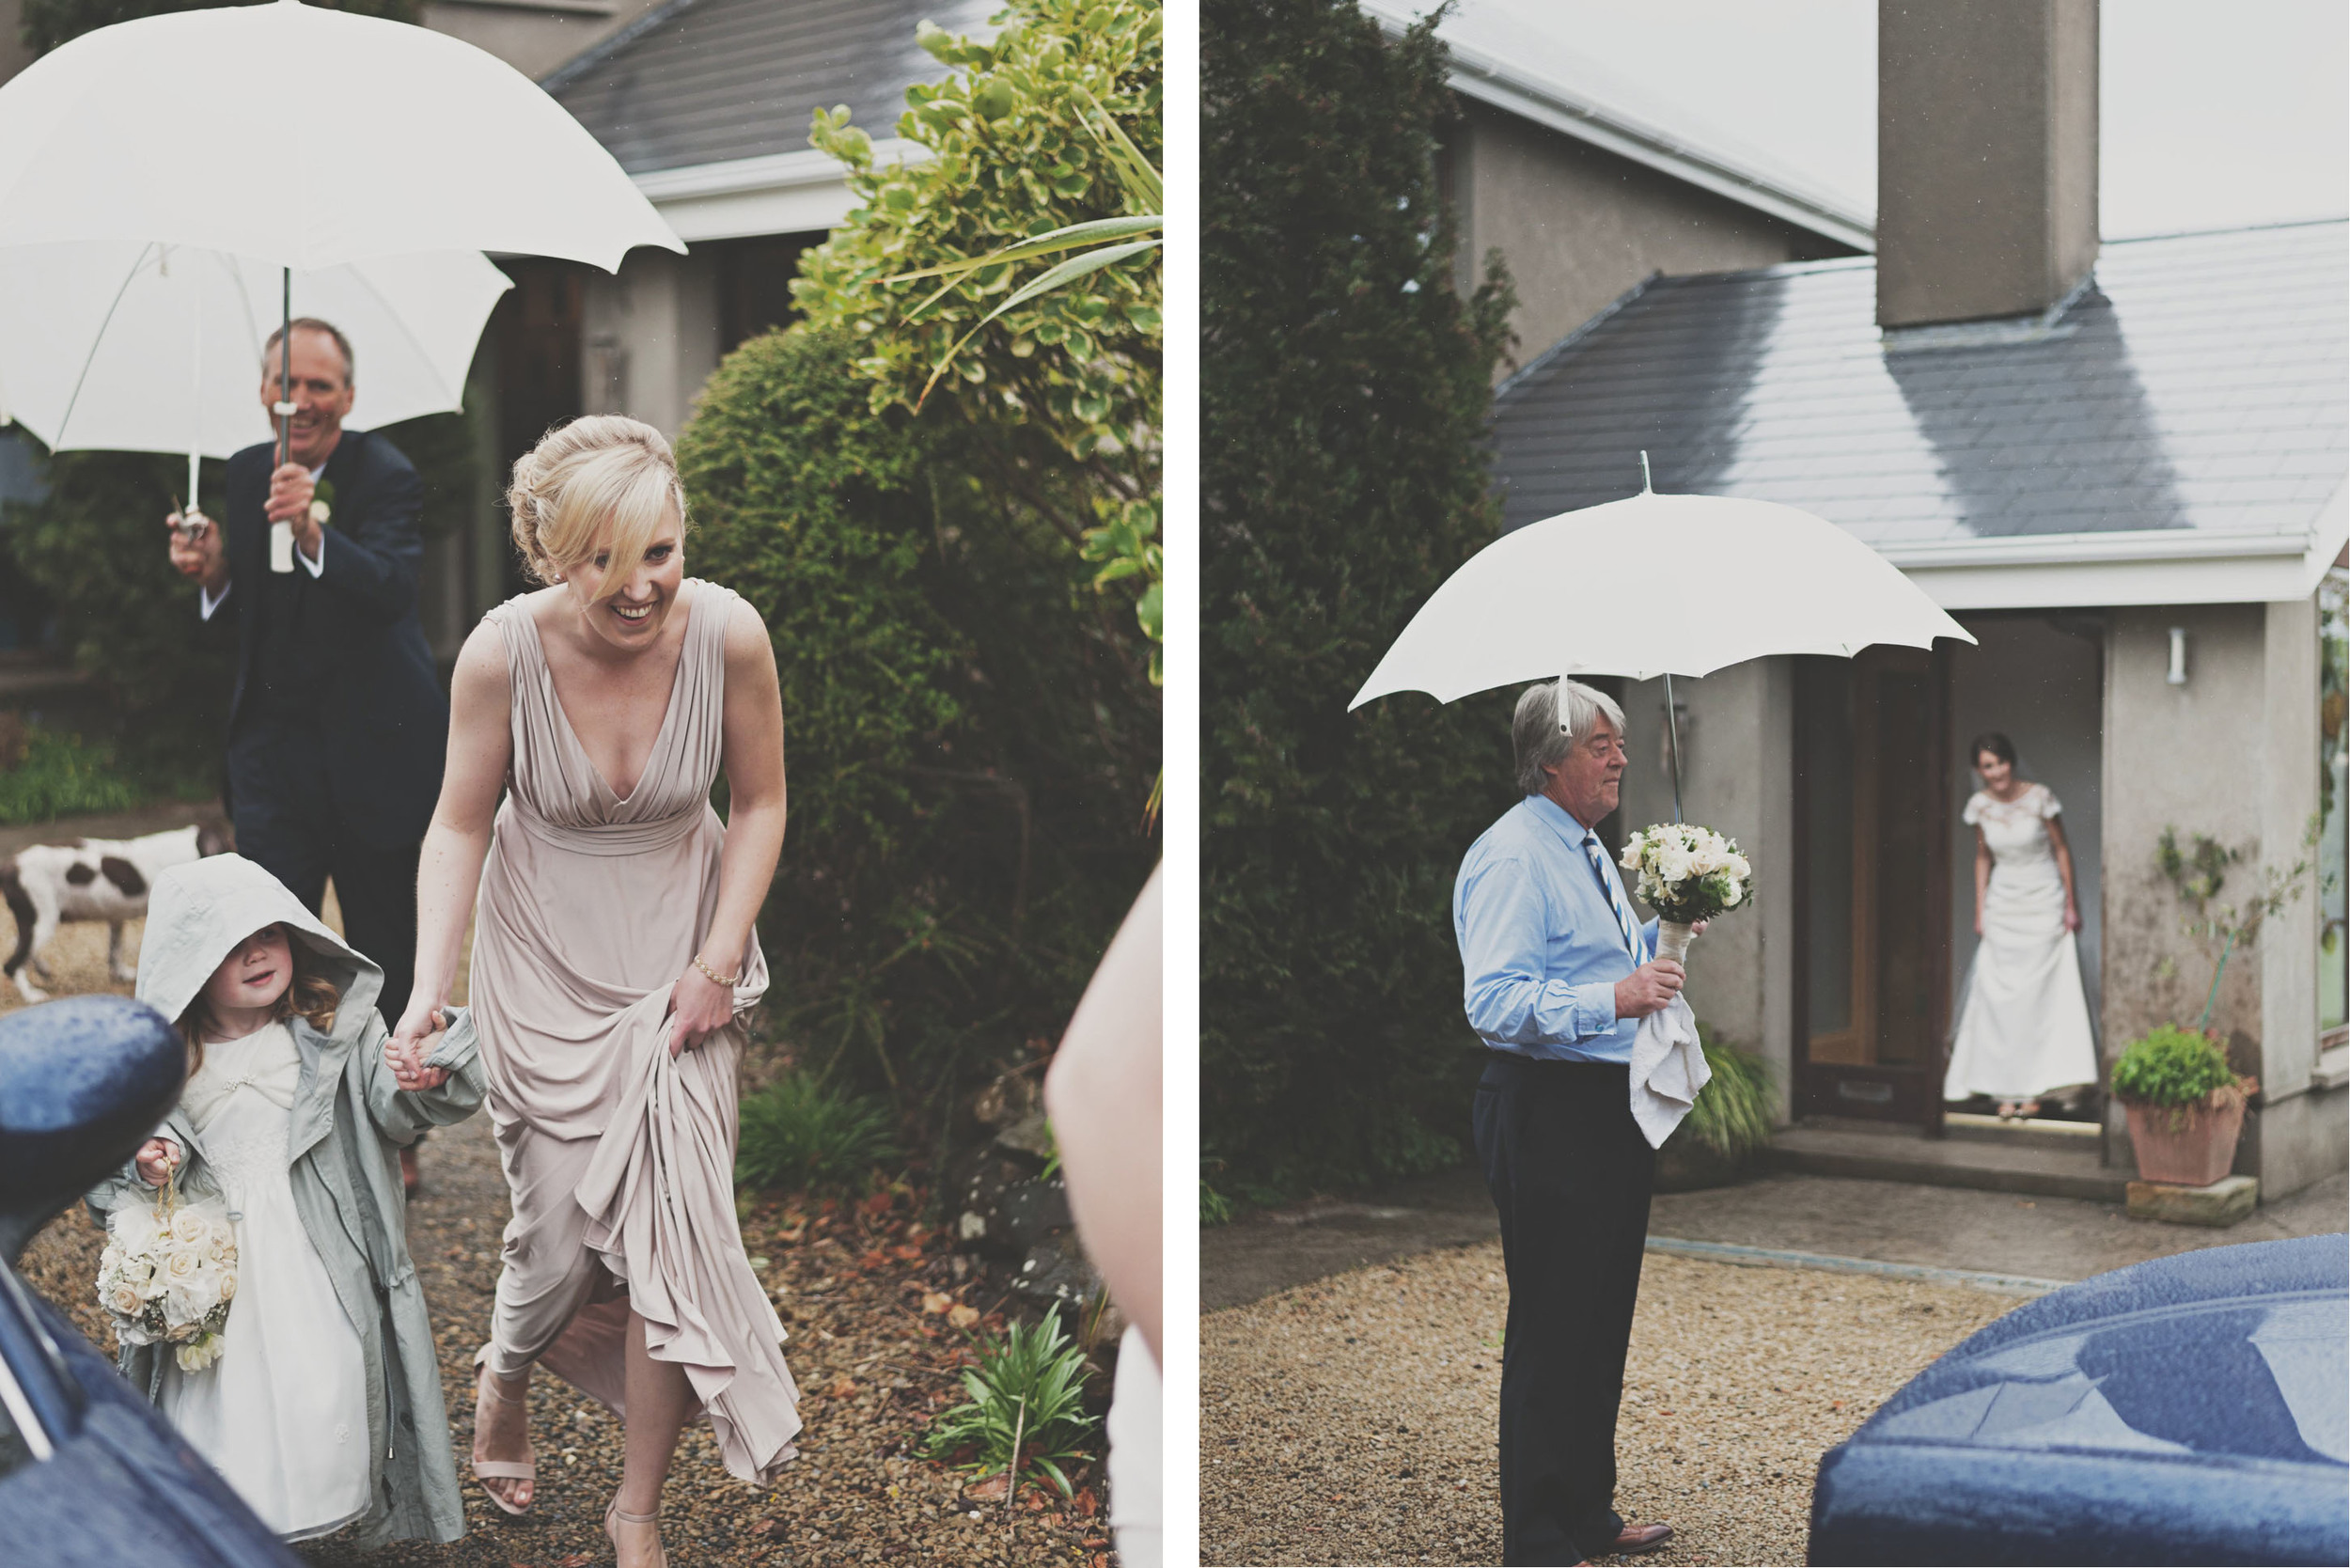 Drizzle of rain as bride leaves the house